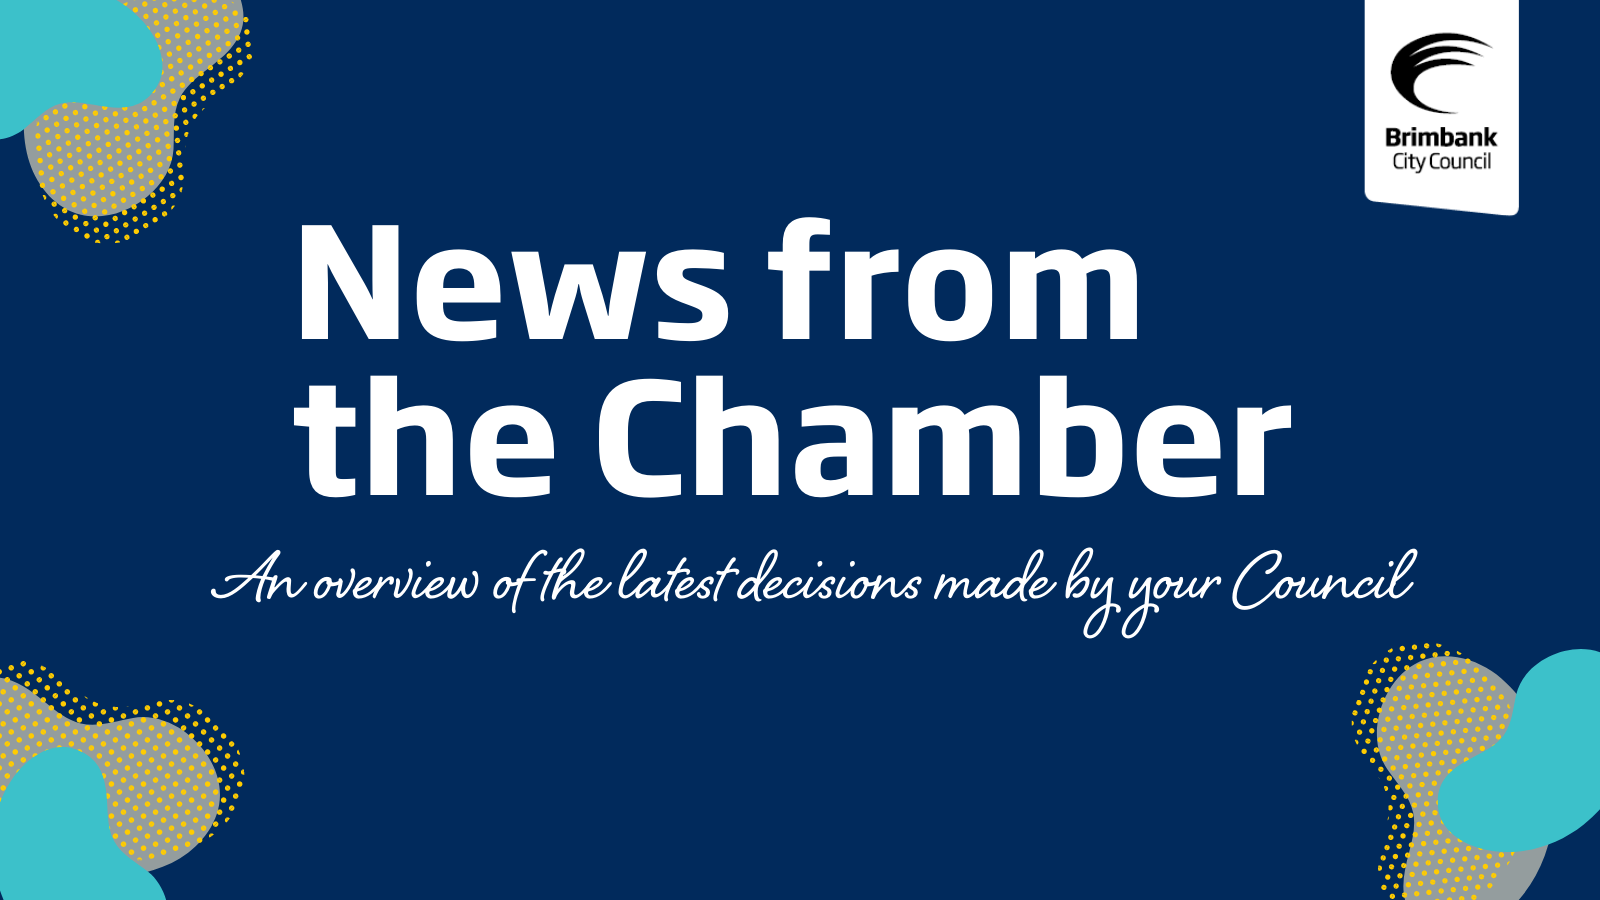 News from the Chamber